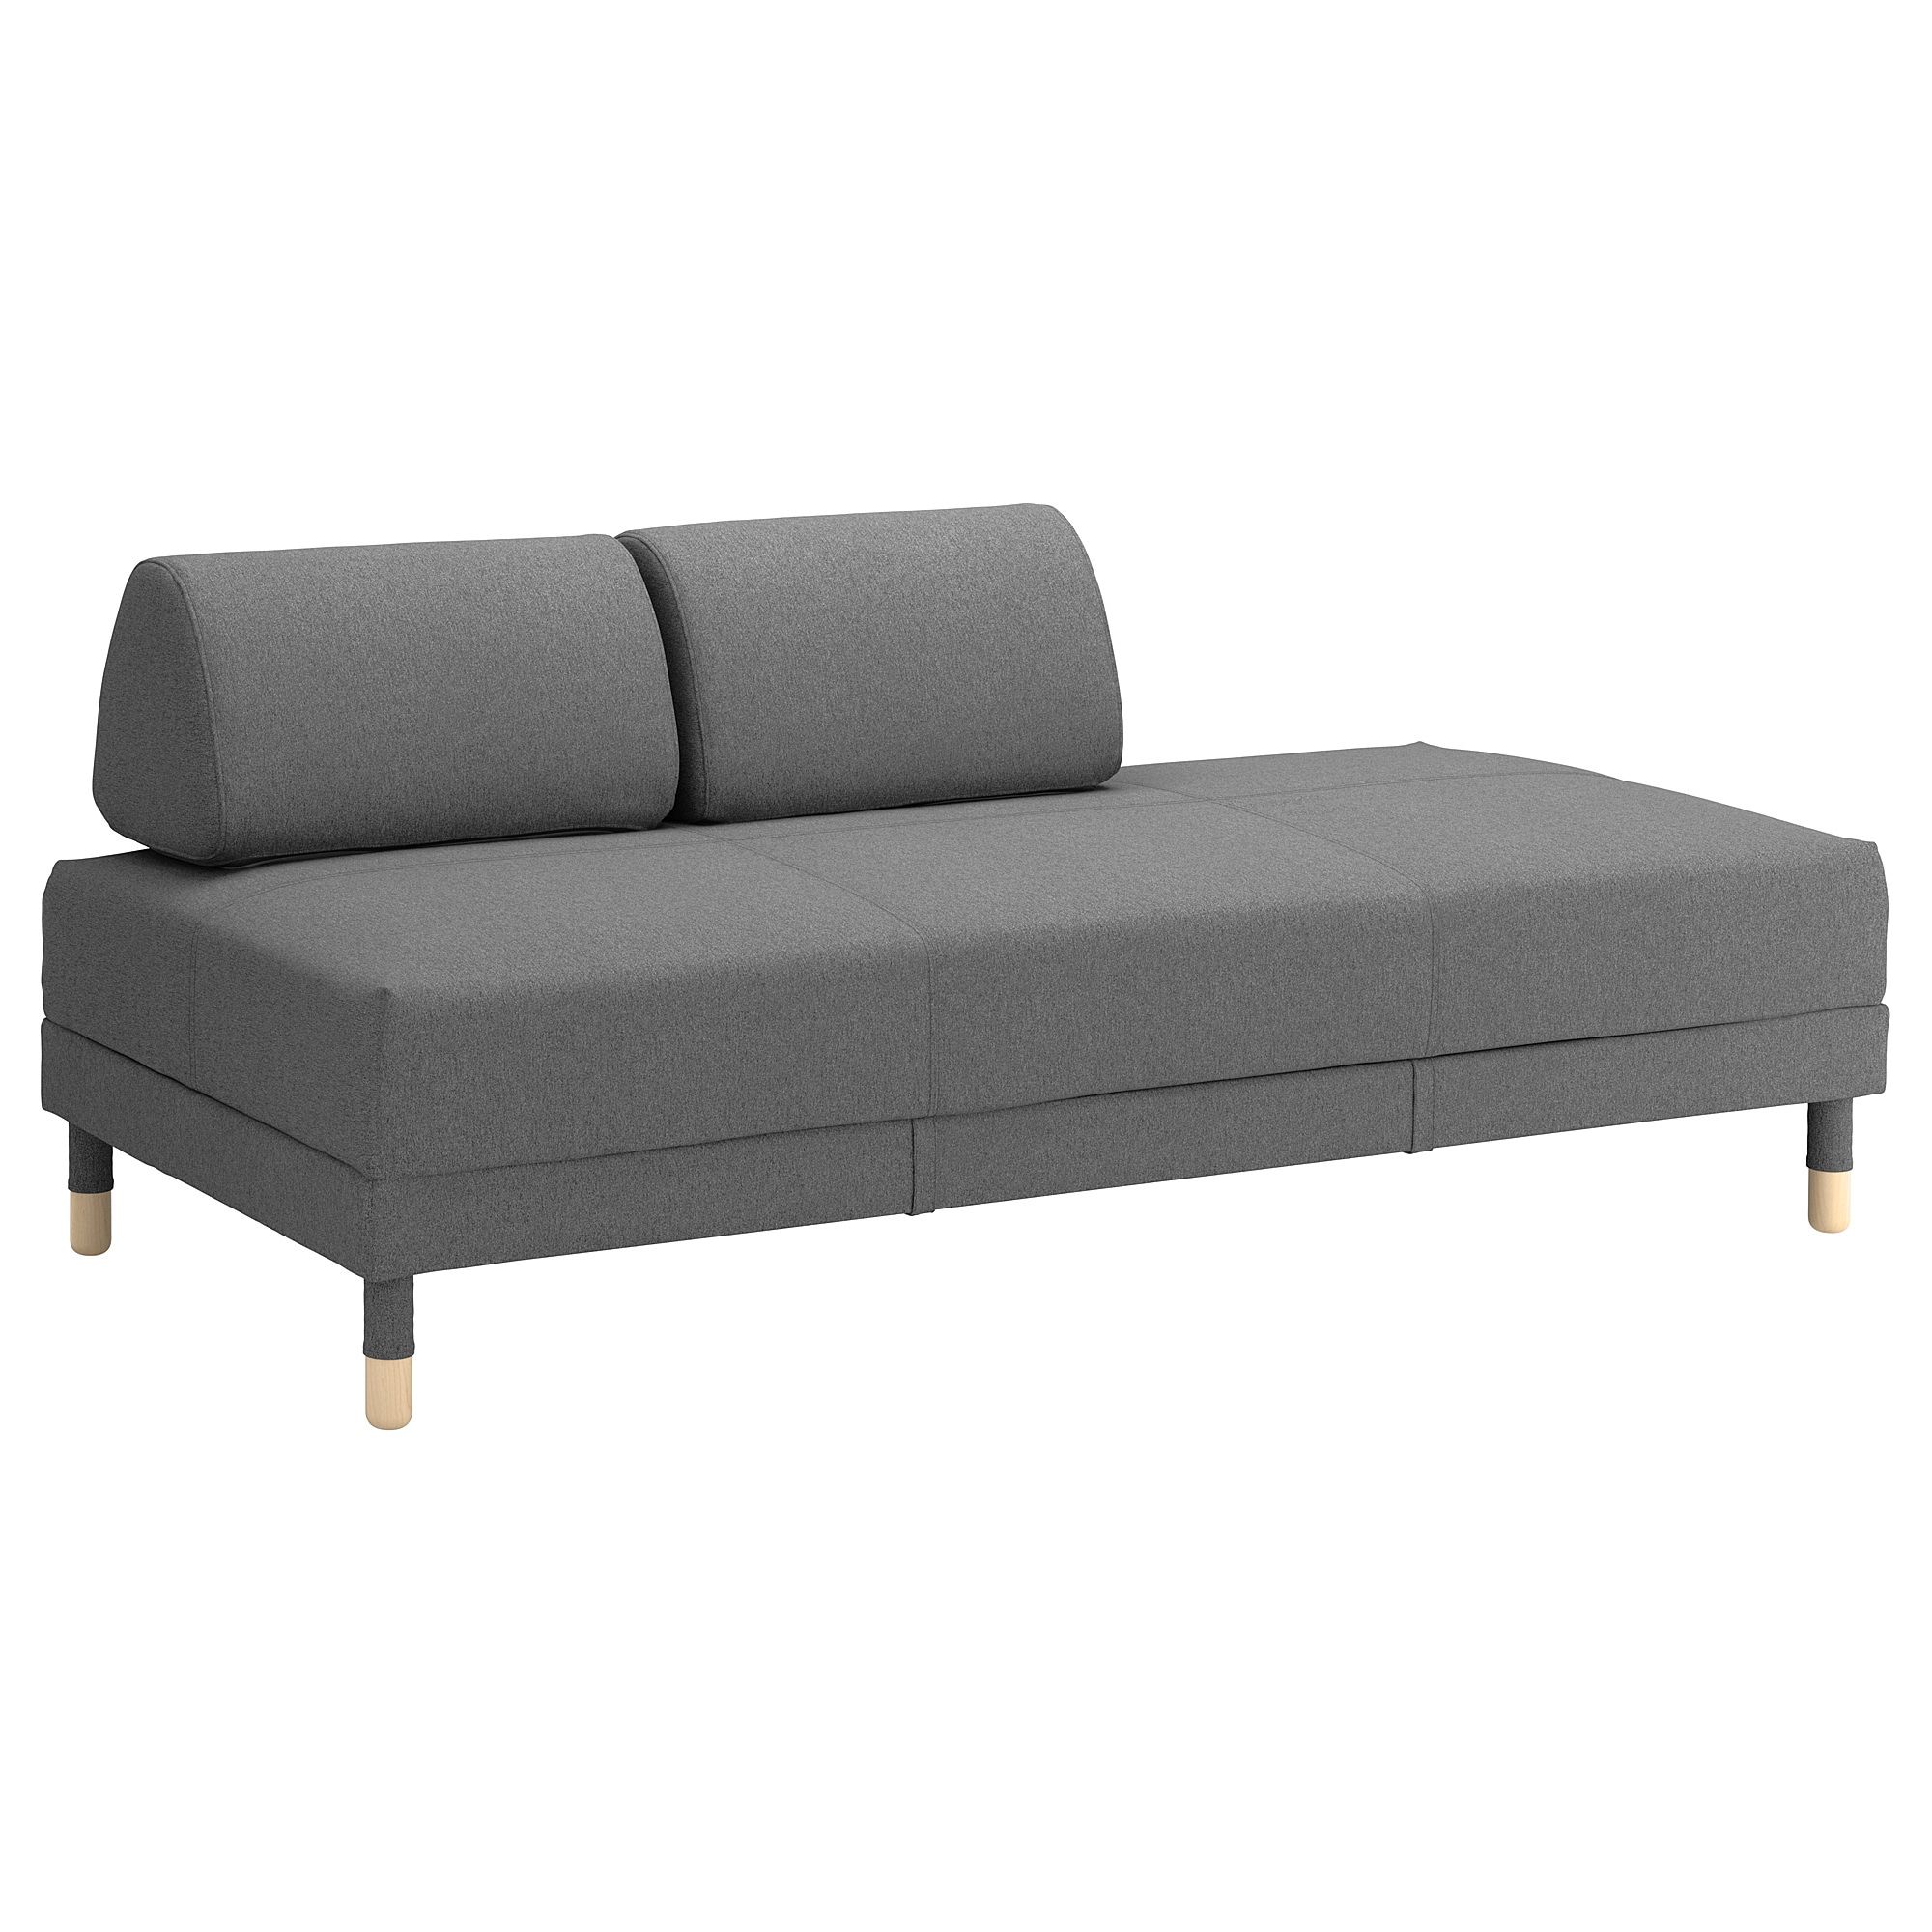 Most Recently Released Ikea Sofa Chairs With Regard To Flottebo Sofa Bed Lysed Dark Grey 90 Cm – Ikea (View 4 of 20)